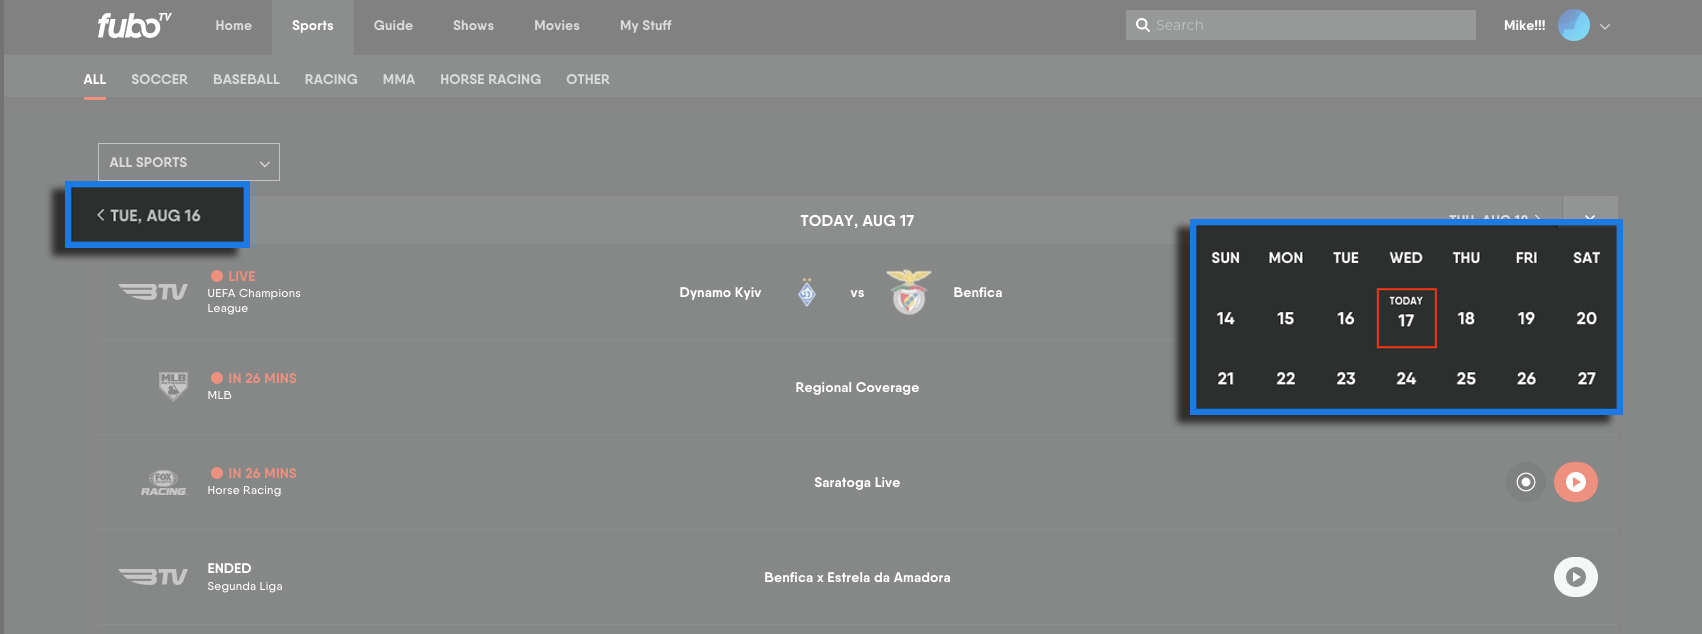 SPORTS screen on FuboTV for a browser with calendar and date selection highlighted